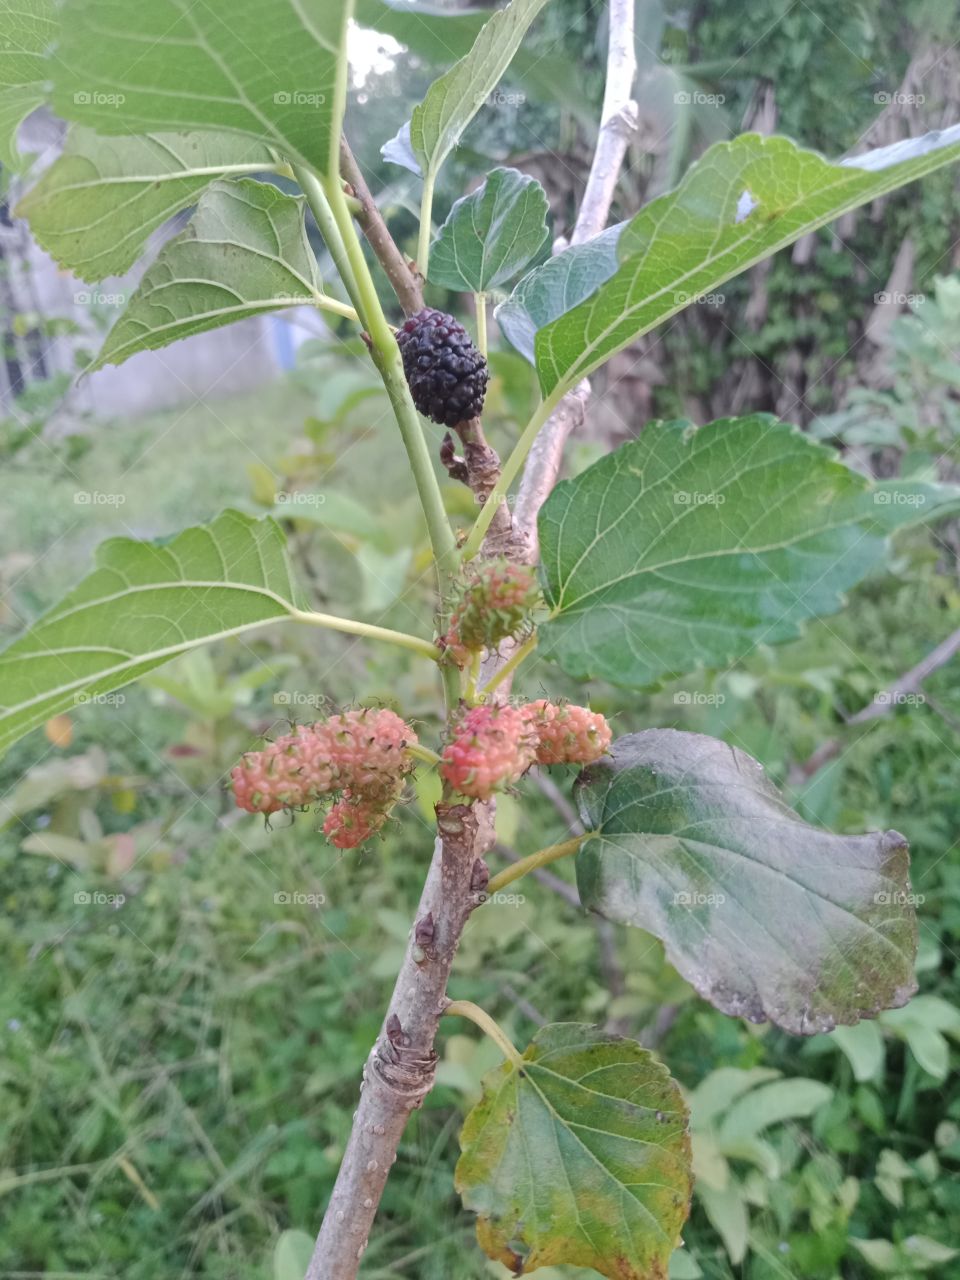 Mulberry beside my home